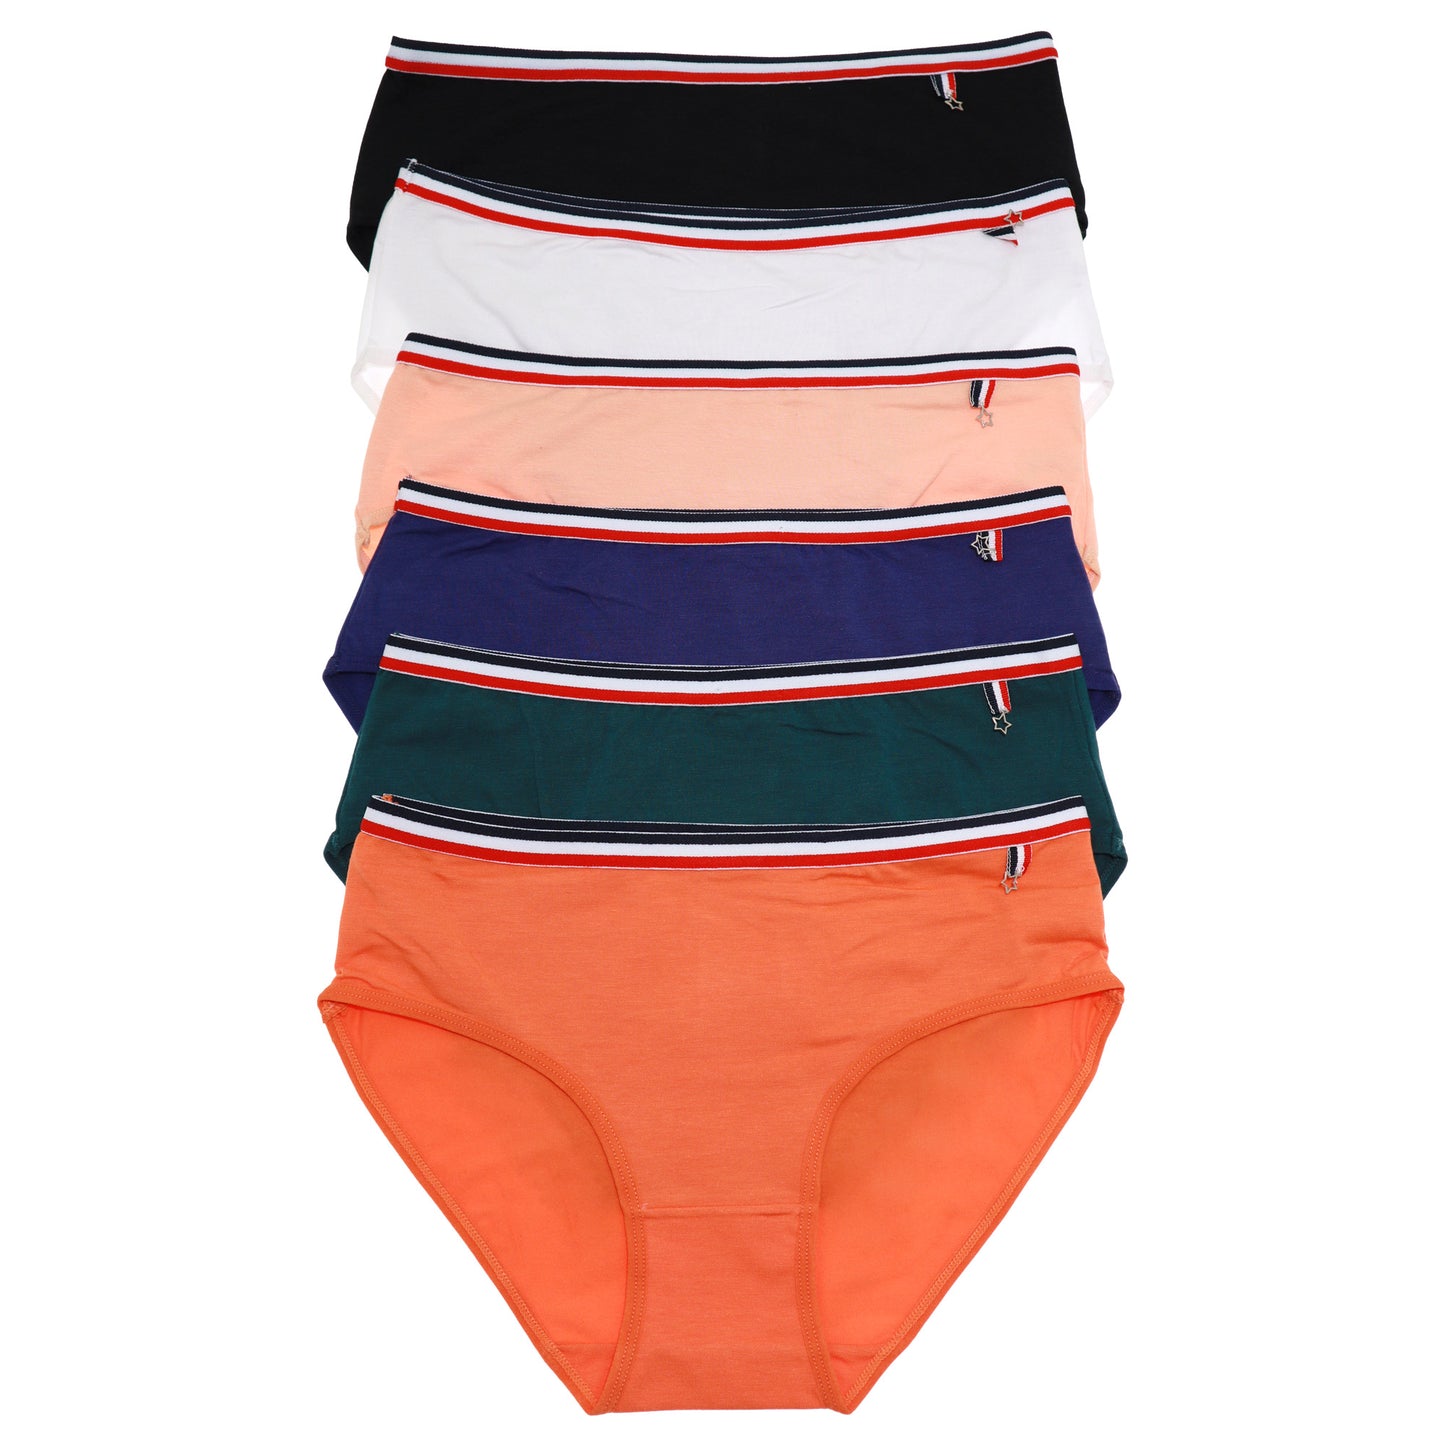 Cotton Hiphugger Panties with Striped Elastic Waistband (6-Pack)